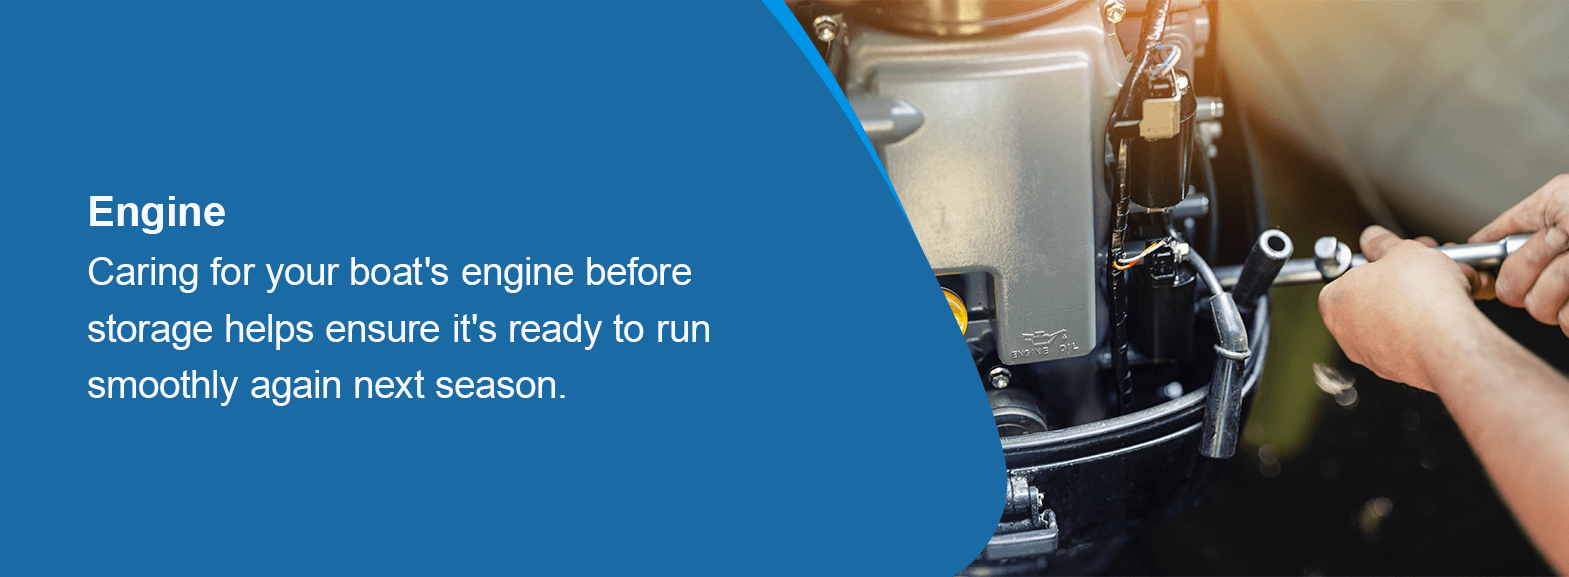 Engine - Caring for your boat's engine before storage helps ensure it's ready to run smoothly again next season. 